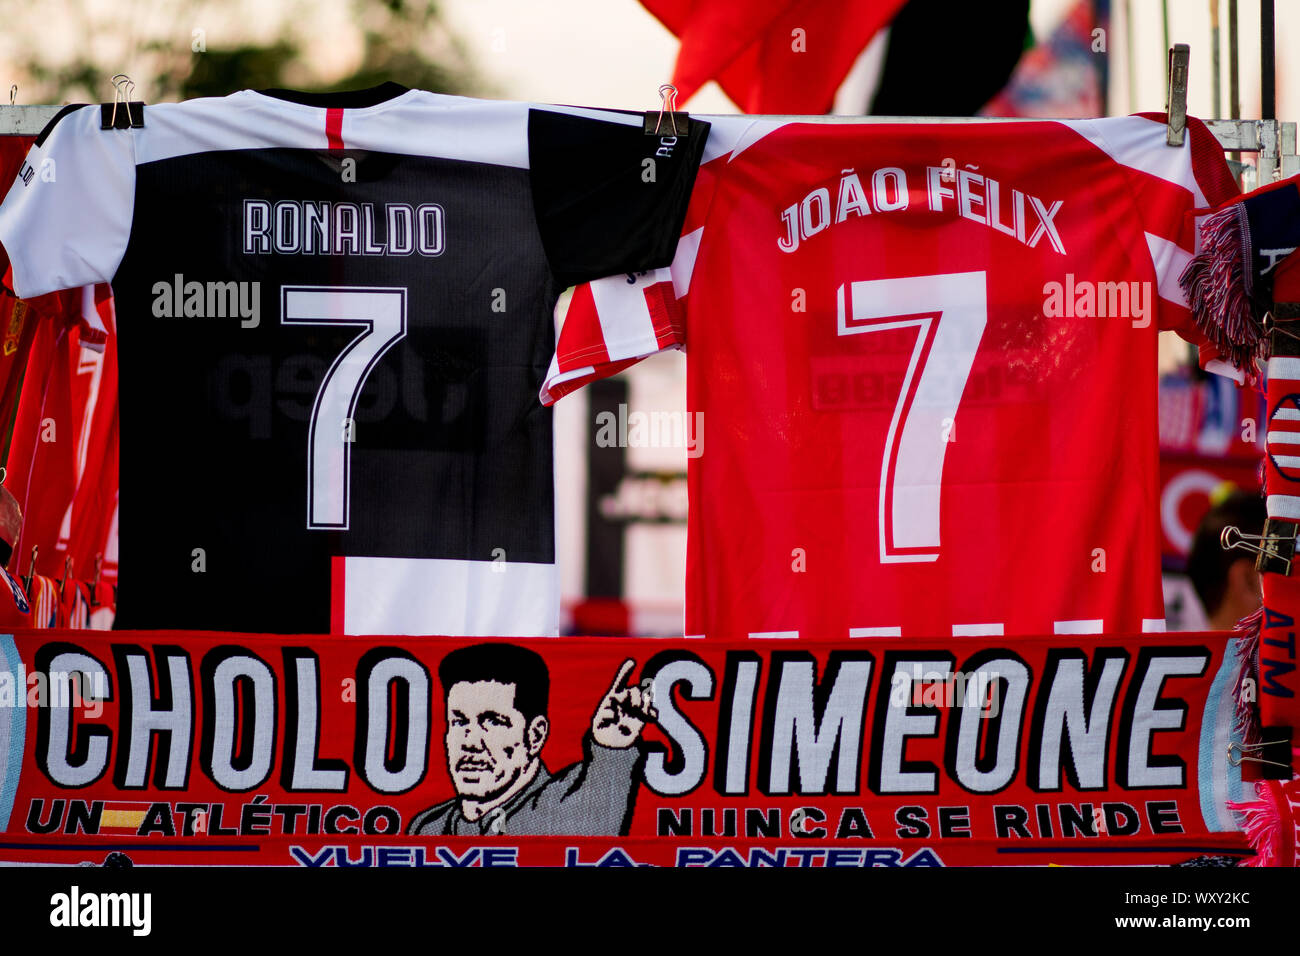 Madrid, Spain. 18th September, 2019. Shirts of Cristiano Ronaldo (Juventus  FC) and Joao Felix (Atletico Madrid) before the start of football match of  UEFA Champions League group stage between Atletico de Madrid